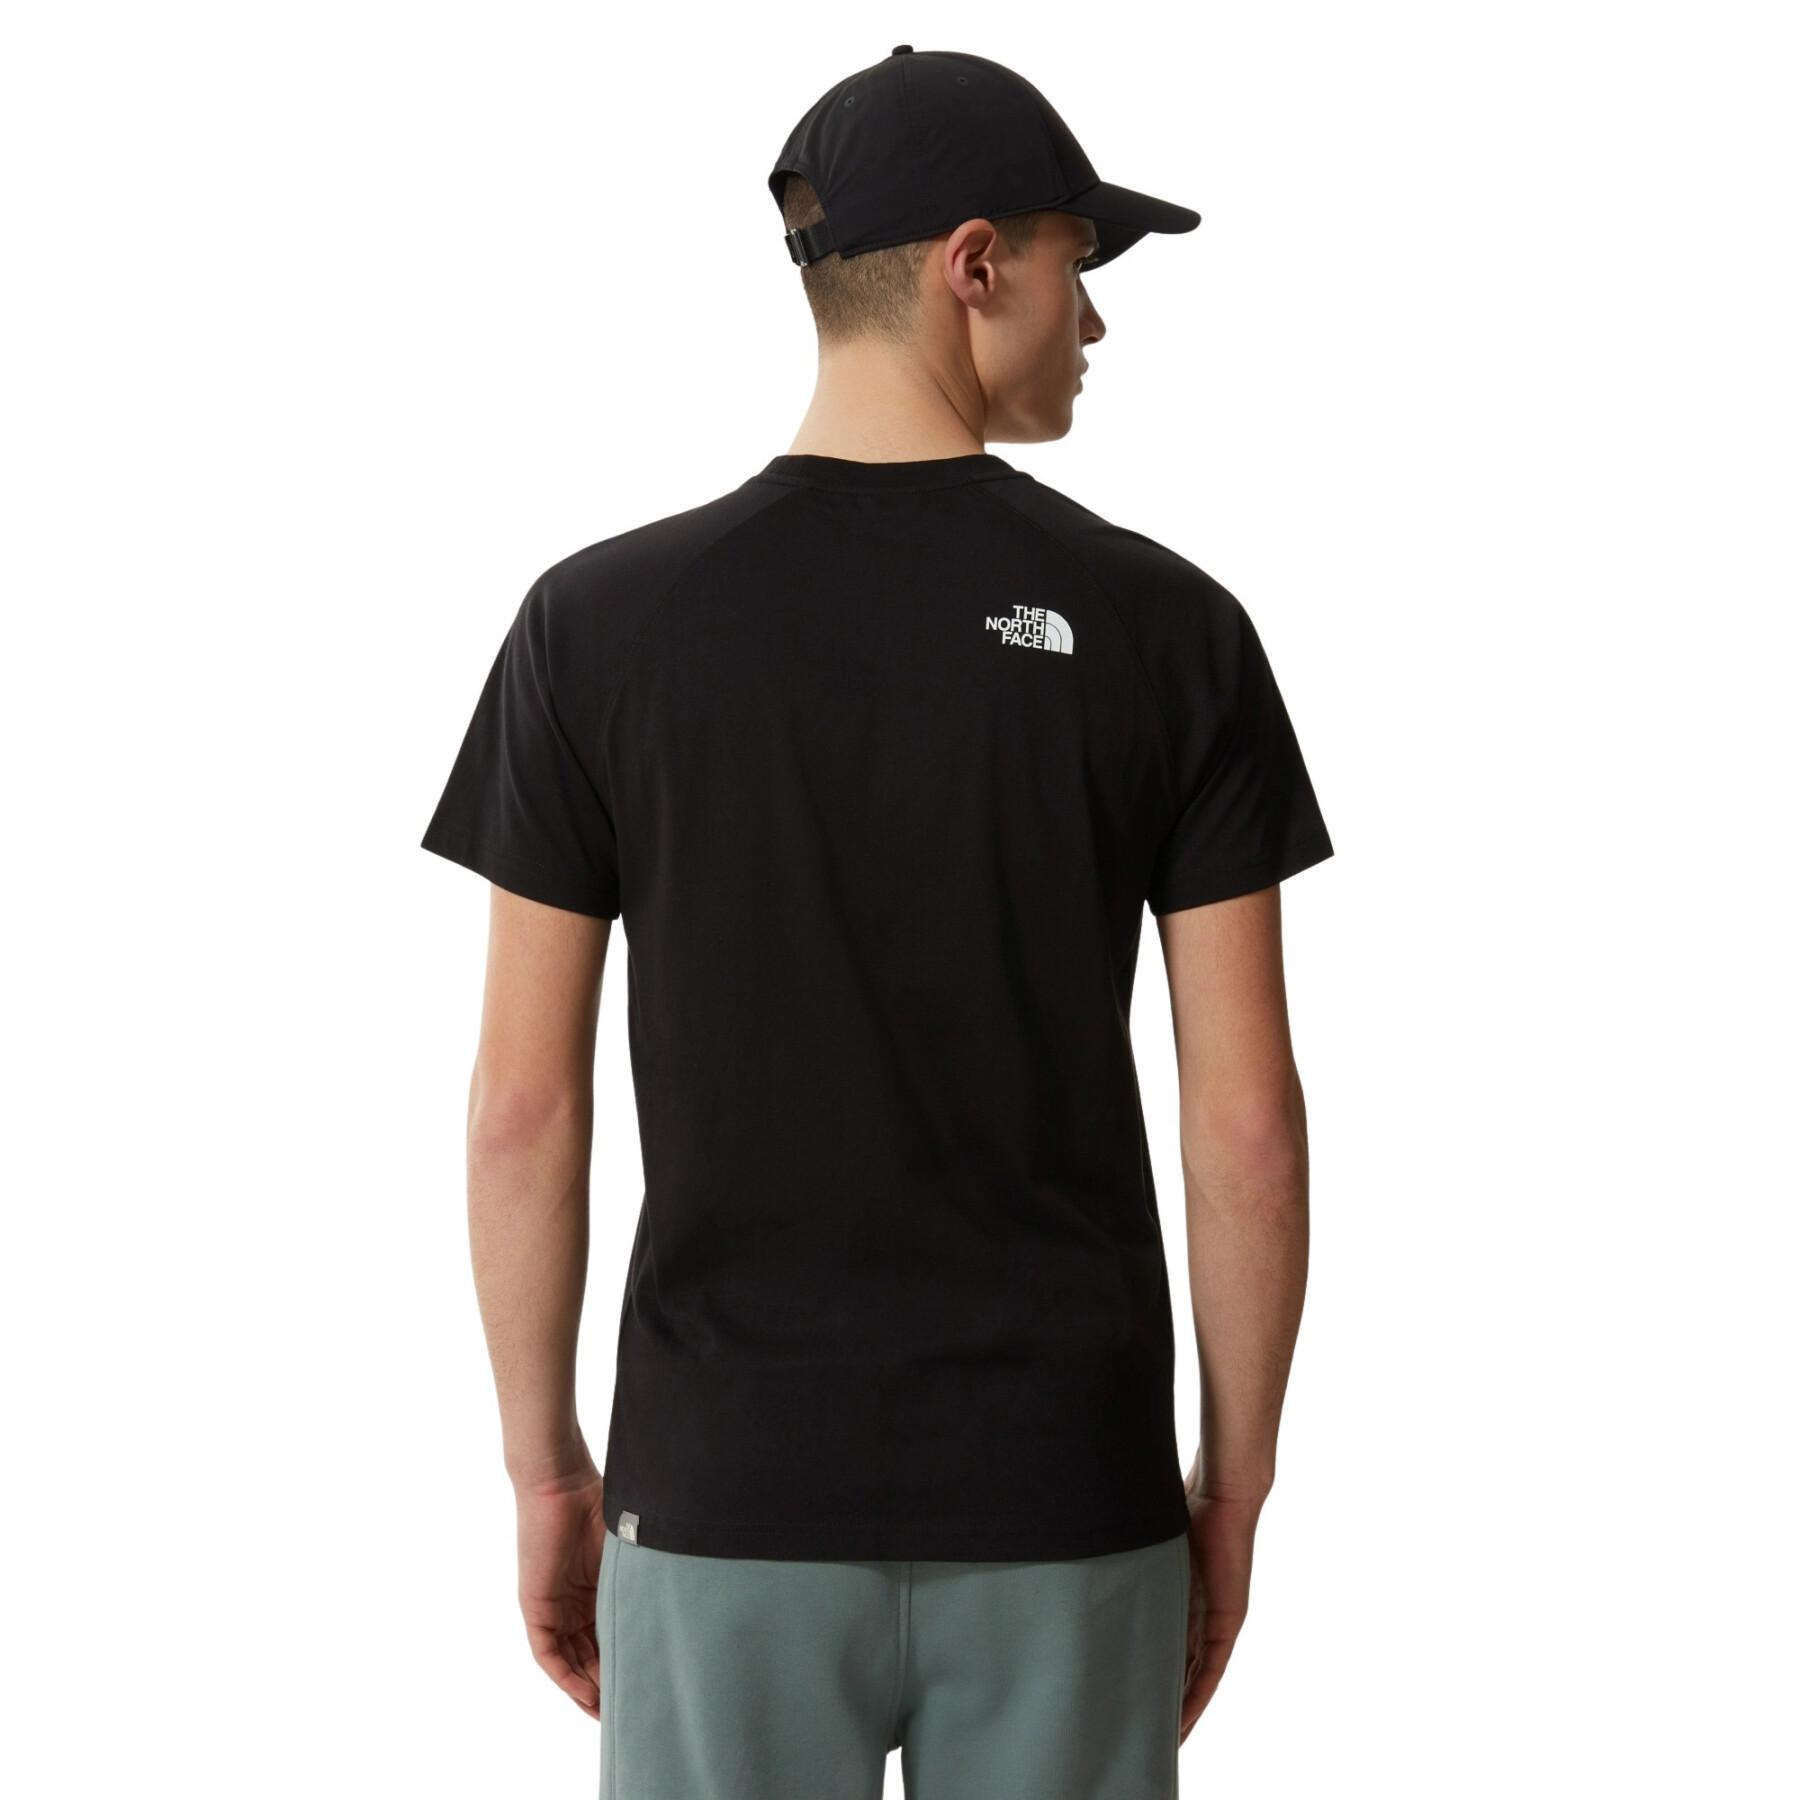 T-shirt The North Face walls coaches